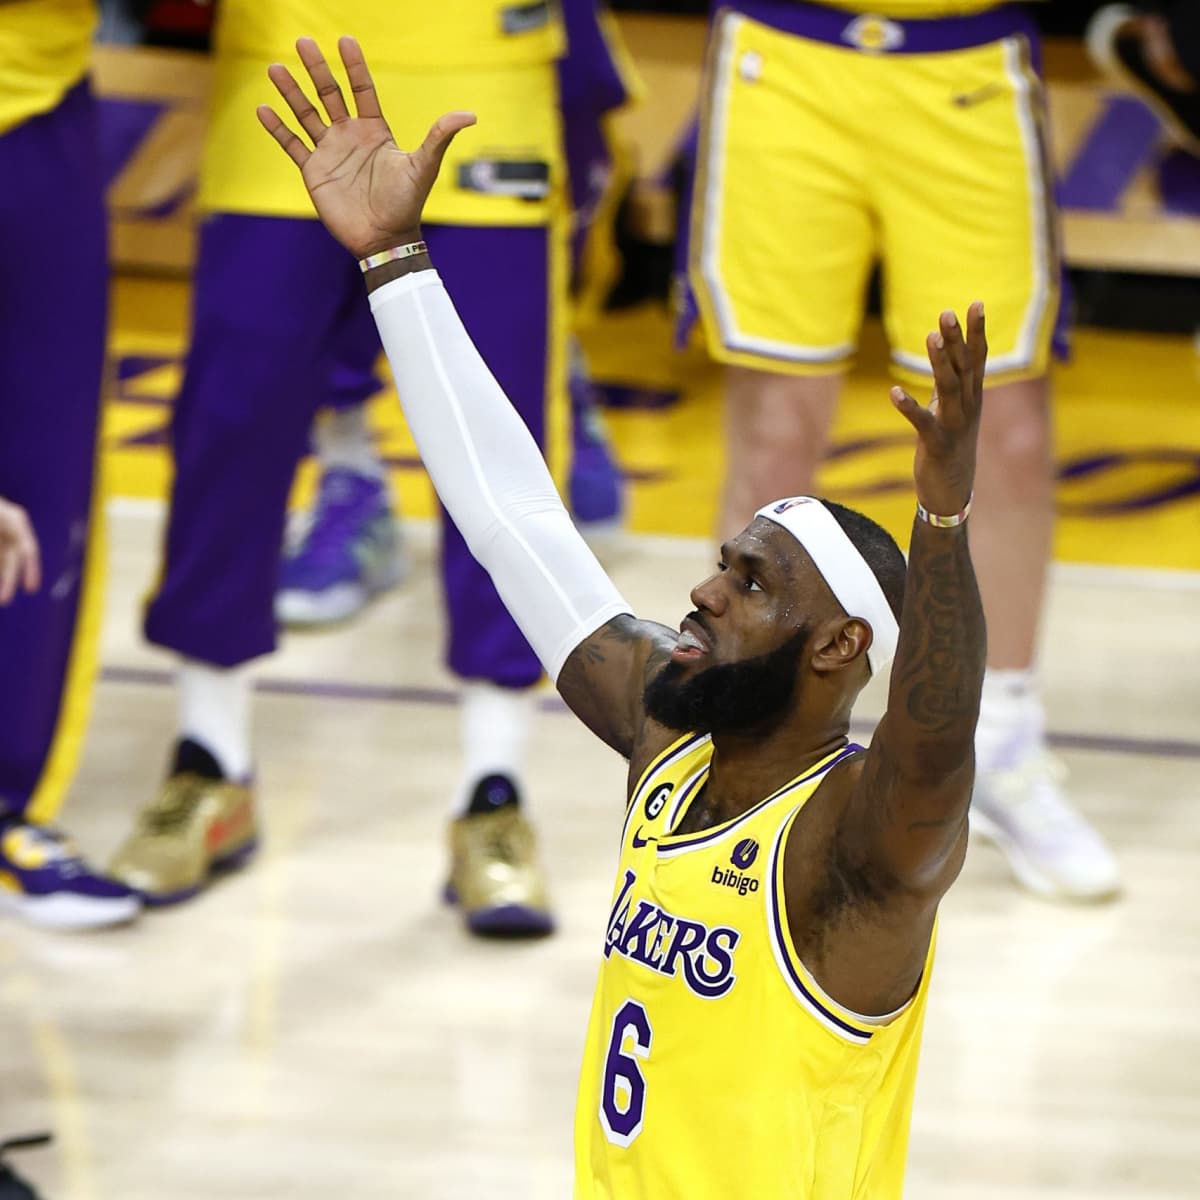 The shorts of the Los Angeles Lakers Just Don worn by LeBron